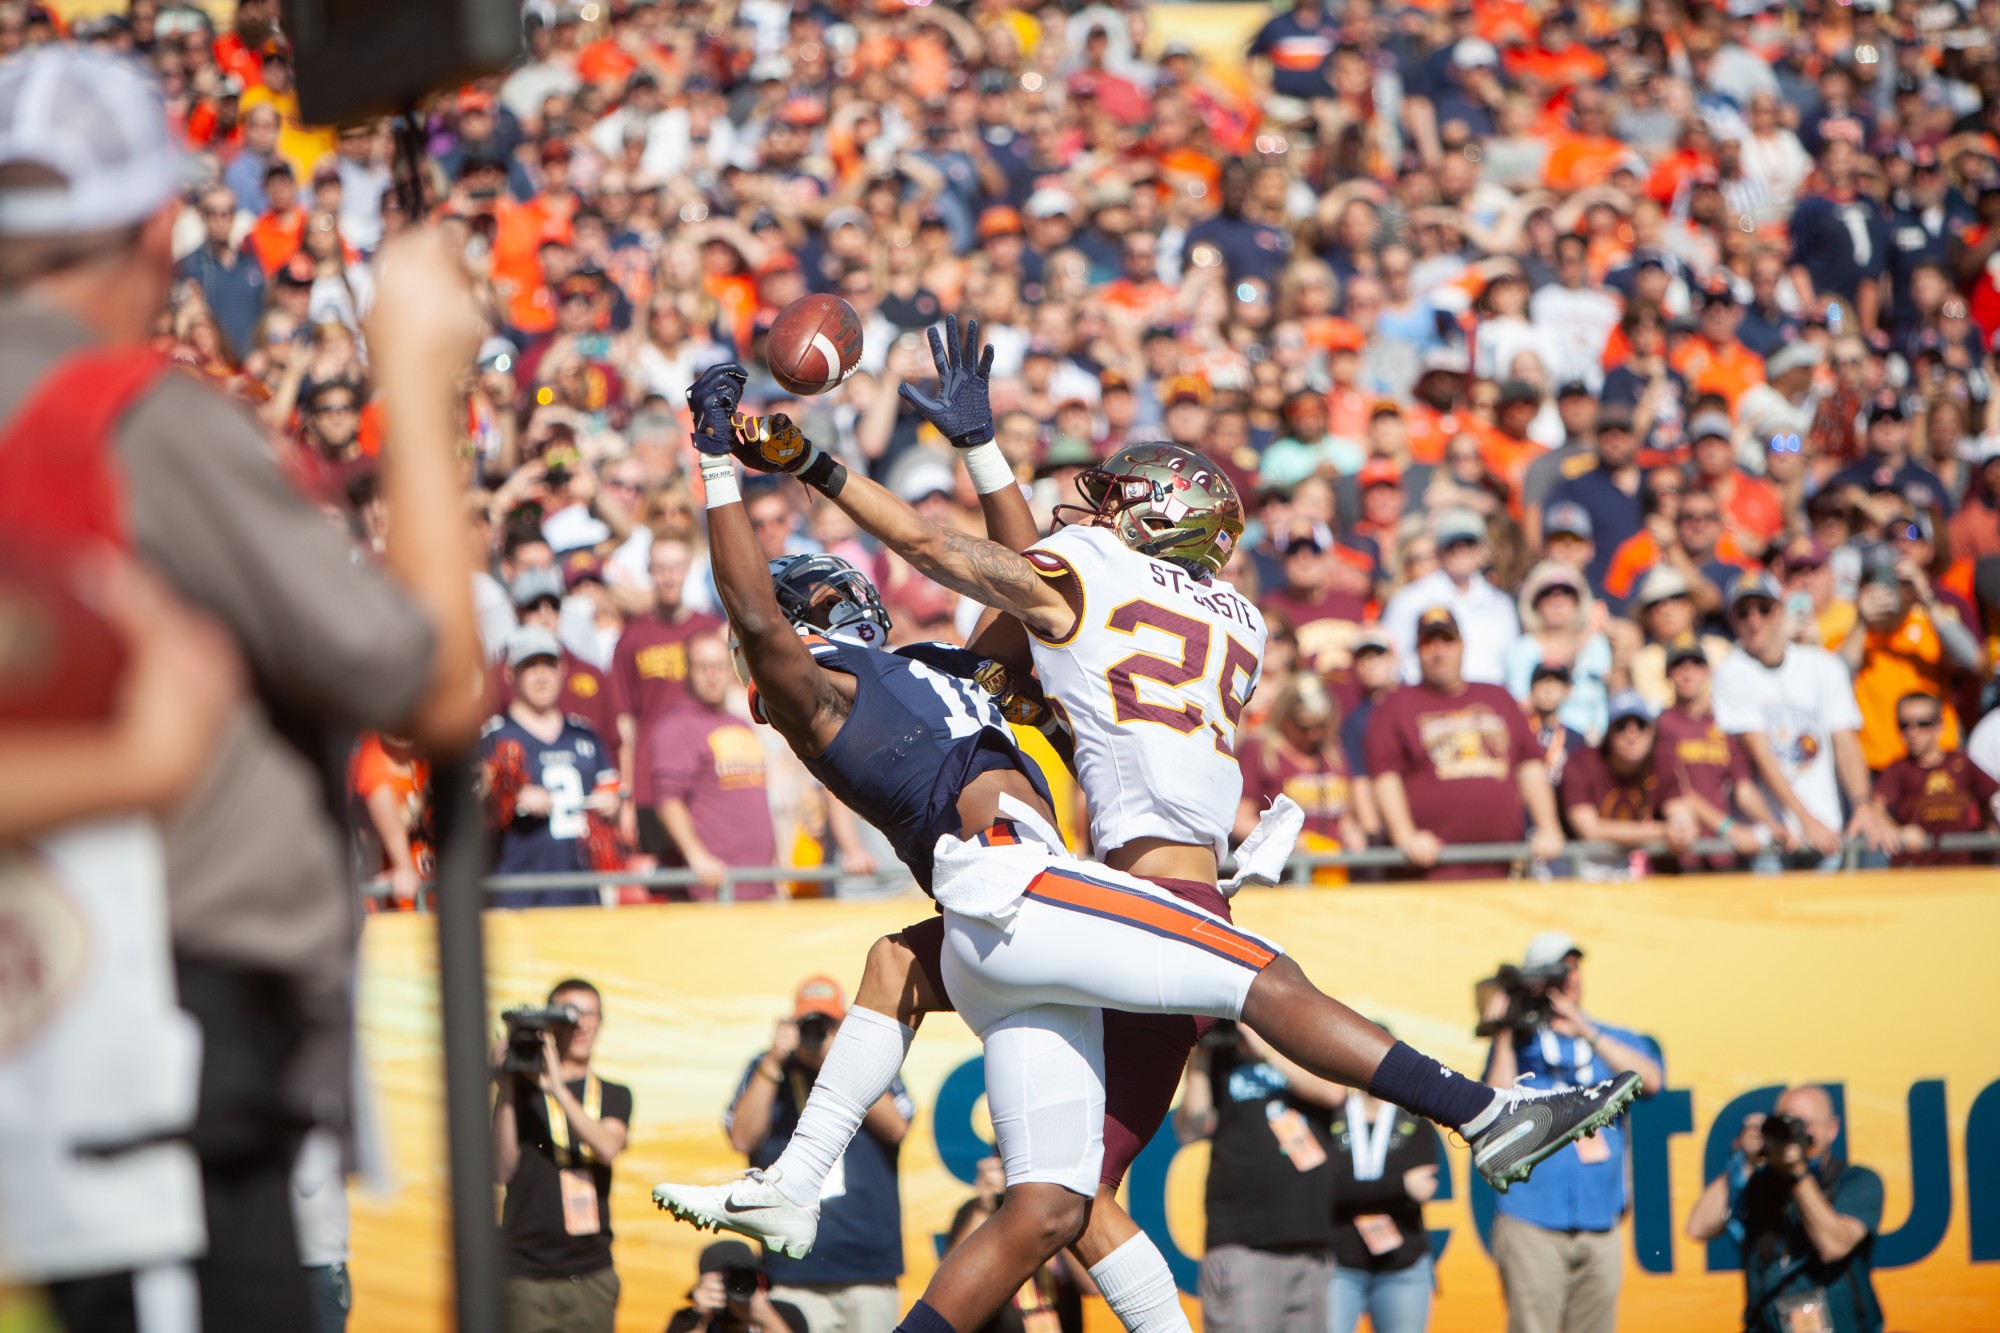 Gophers Defensive Back Benjamin St-Juste leaps for an Auburn pass at Raymond James Stadium in Tampa, Florida on Wednesday, Jan. 1. Minnesota holds a 24-17 lead over Auburn heading into the third quarter of the Outback Bowl. (Kamaan Richards / Minnesota Daily)